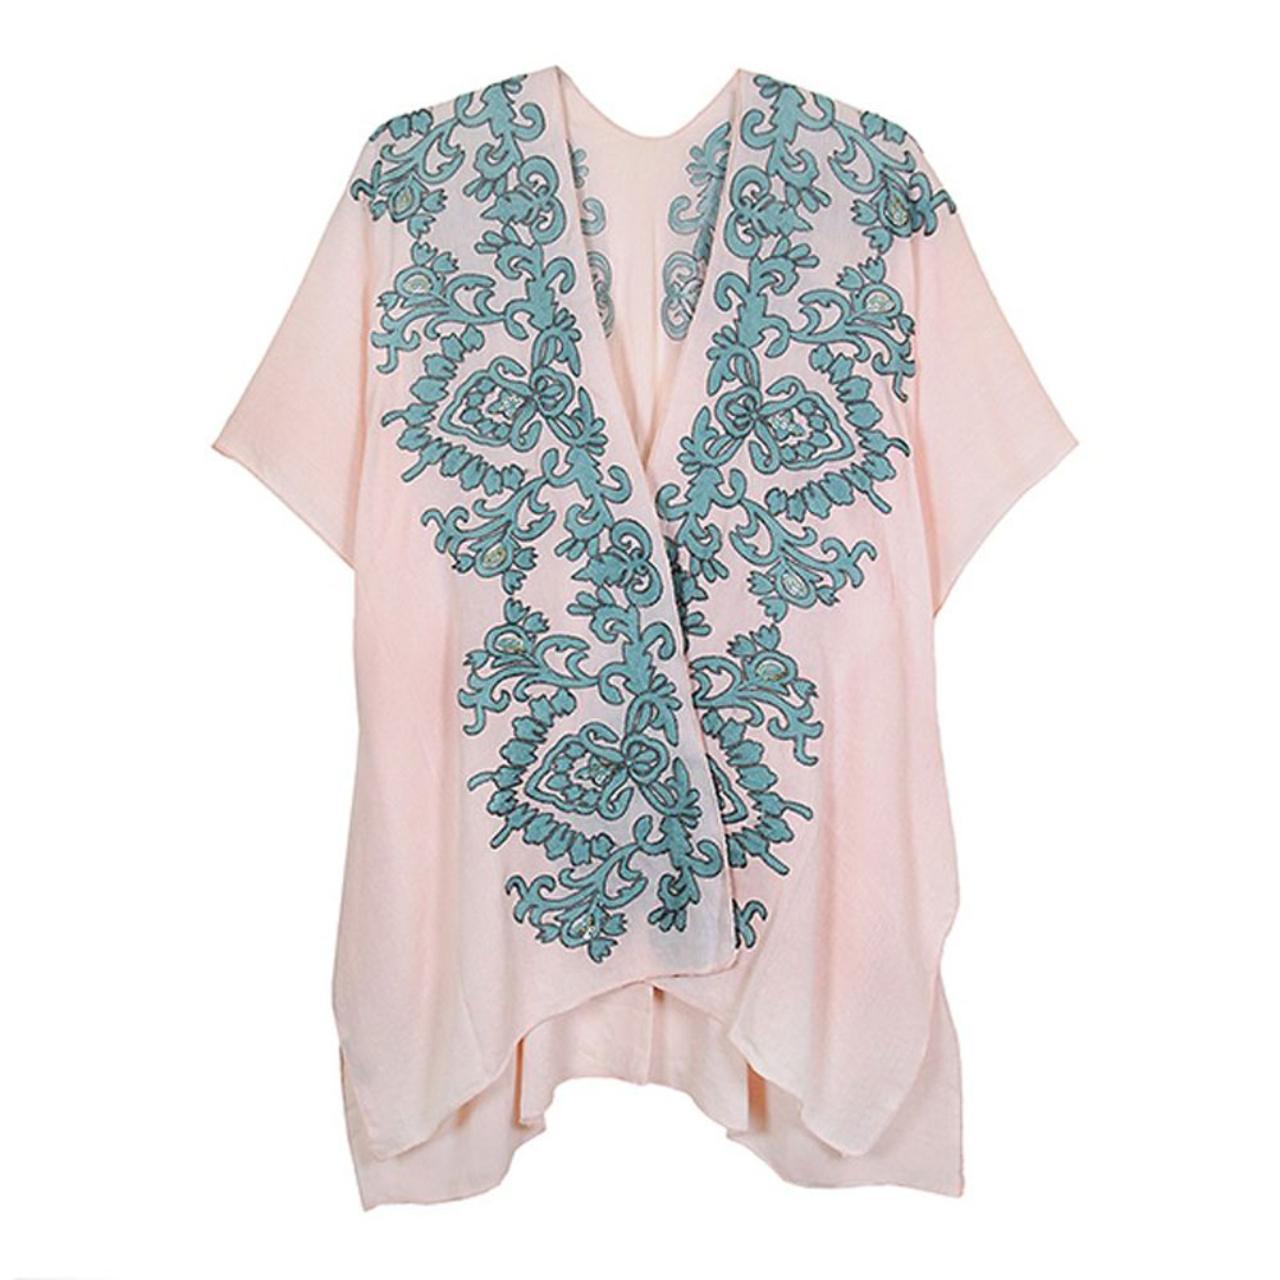 🌺💗🌺PINK FLORAL EMBROIDERY TUNIC COVER-UP🌺💗🌺 The... - Depop